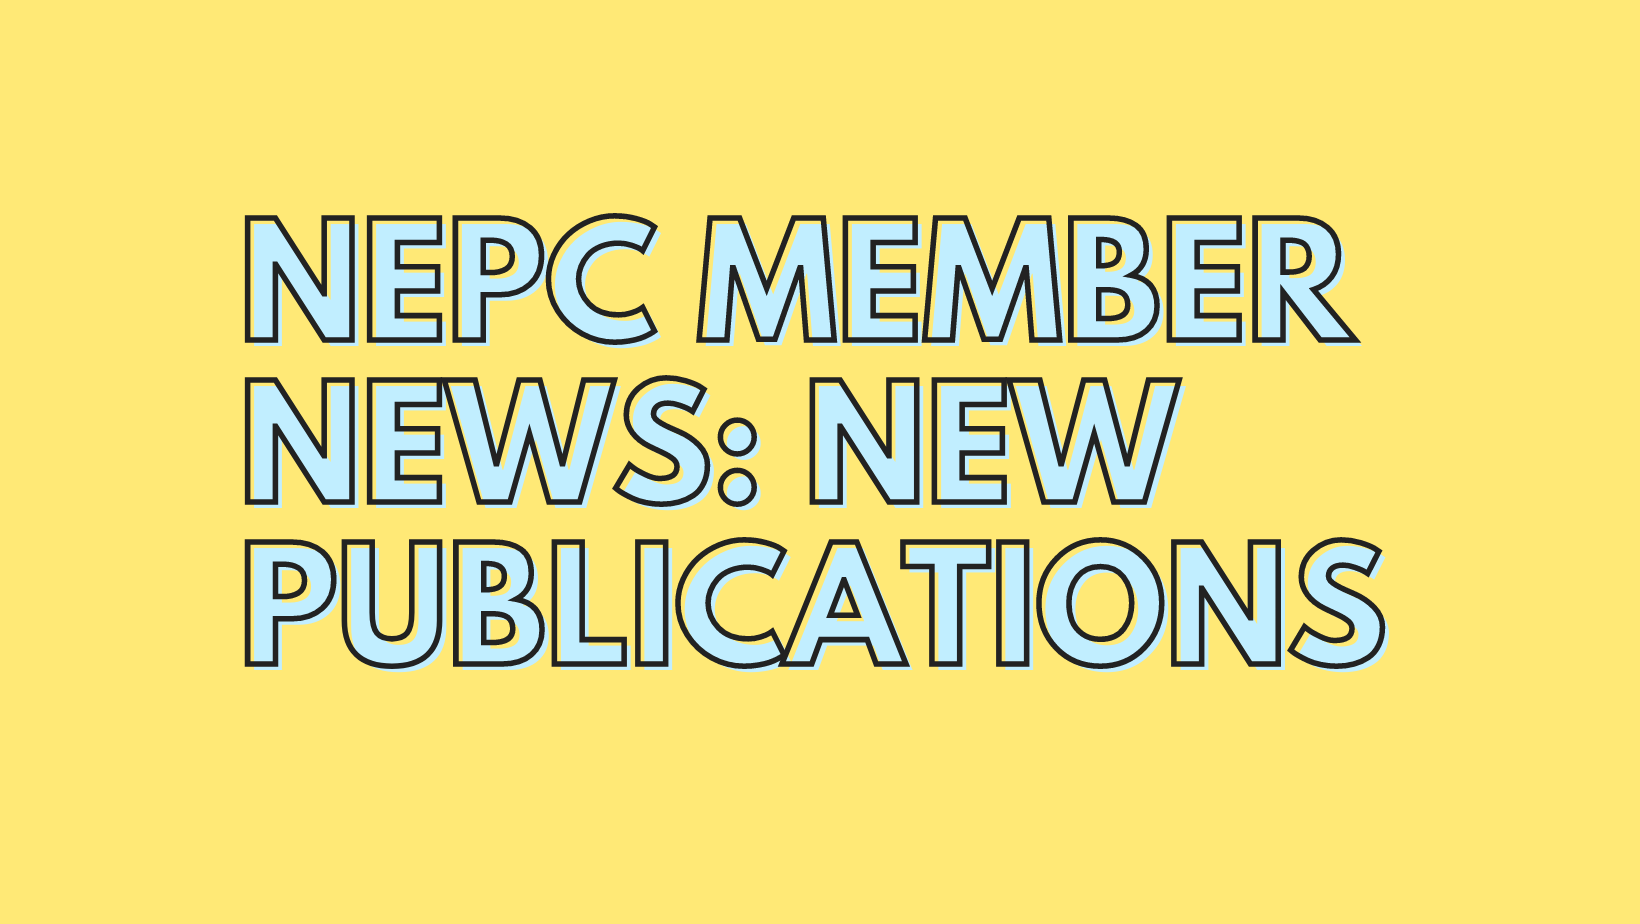 Member Publication News for April & May